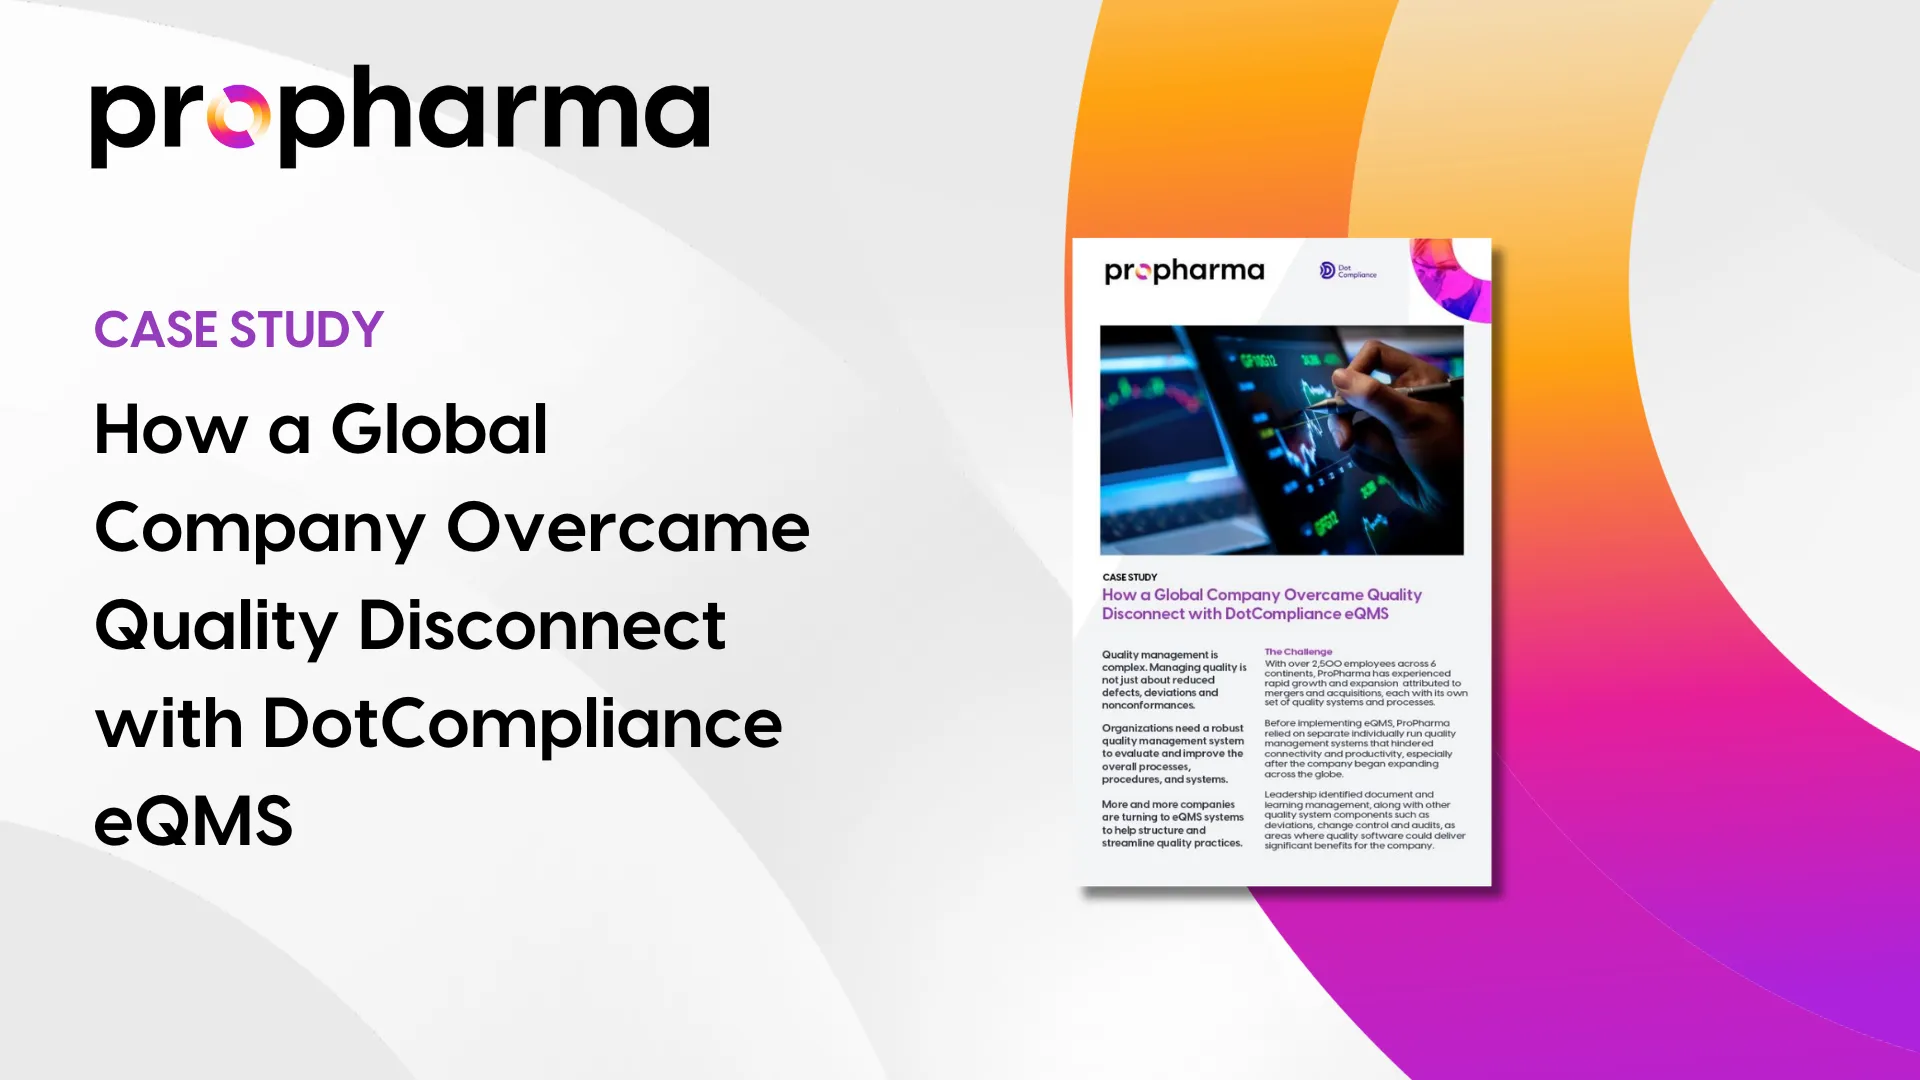 Growing a Culture of Quality and Compliance - ProPharma